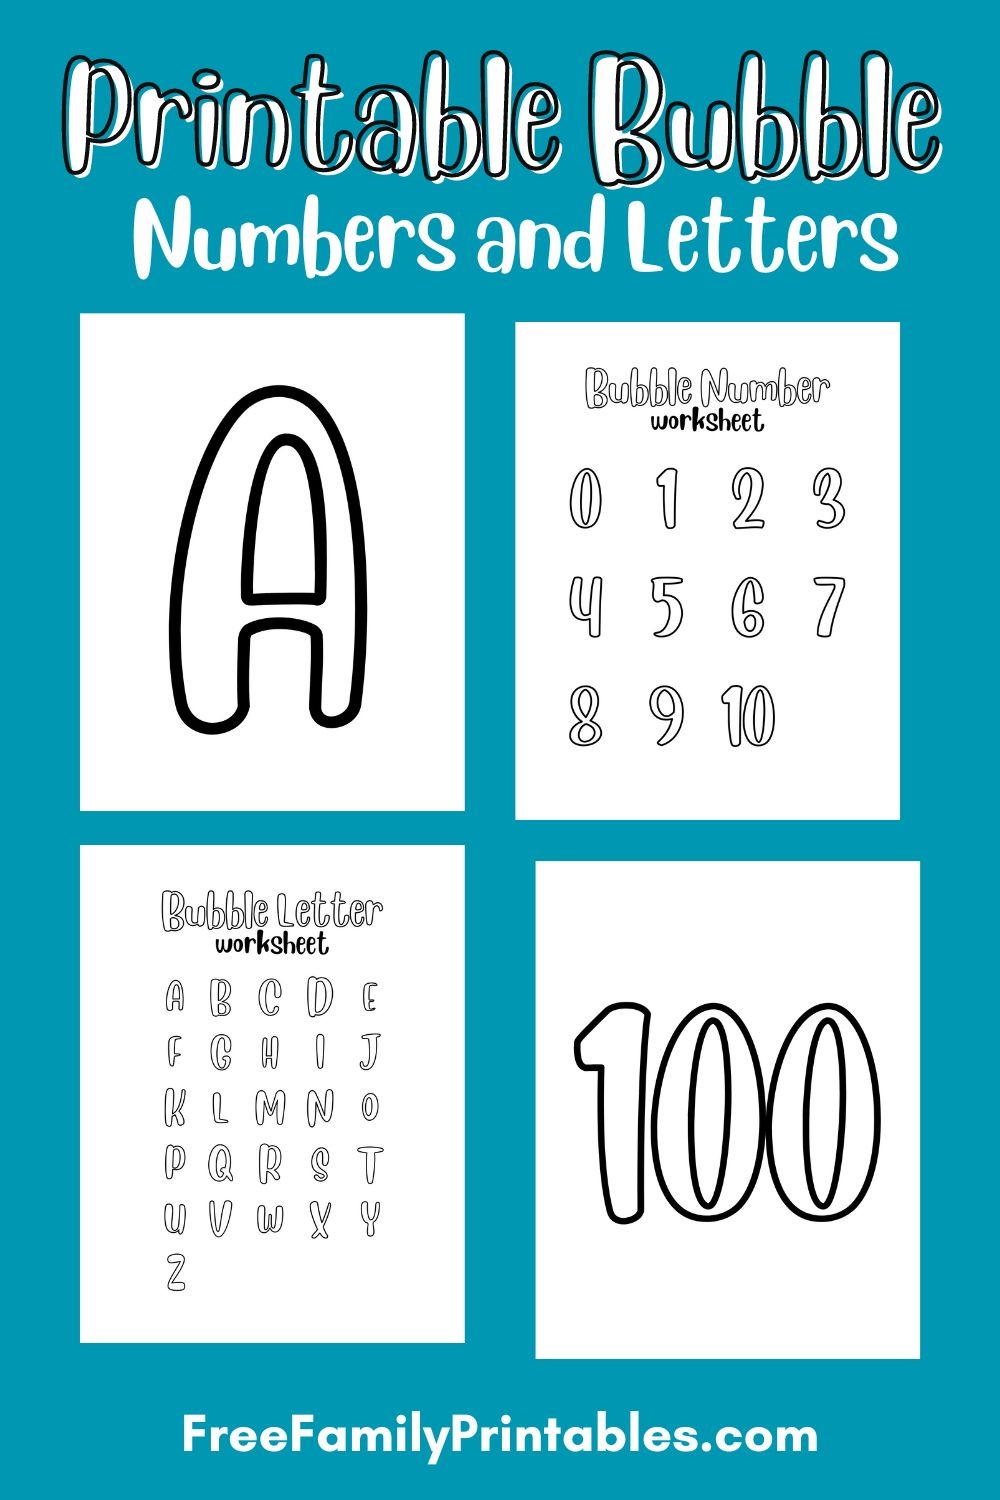 Printable Bubble Numbers 0 100 And Letters A Z Free Family Printables - Free Printable Bubble Letters Font